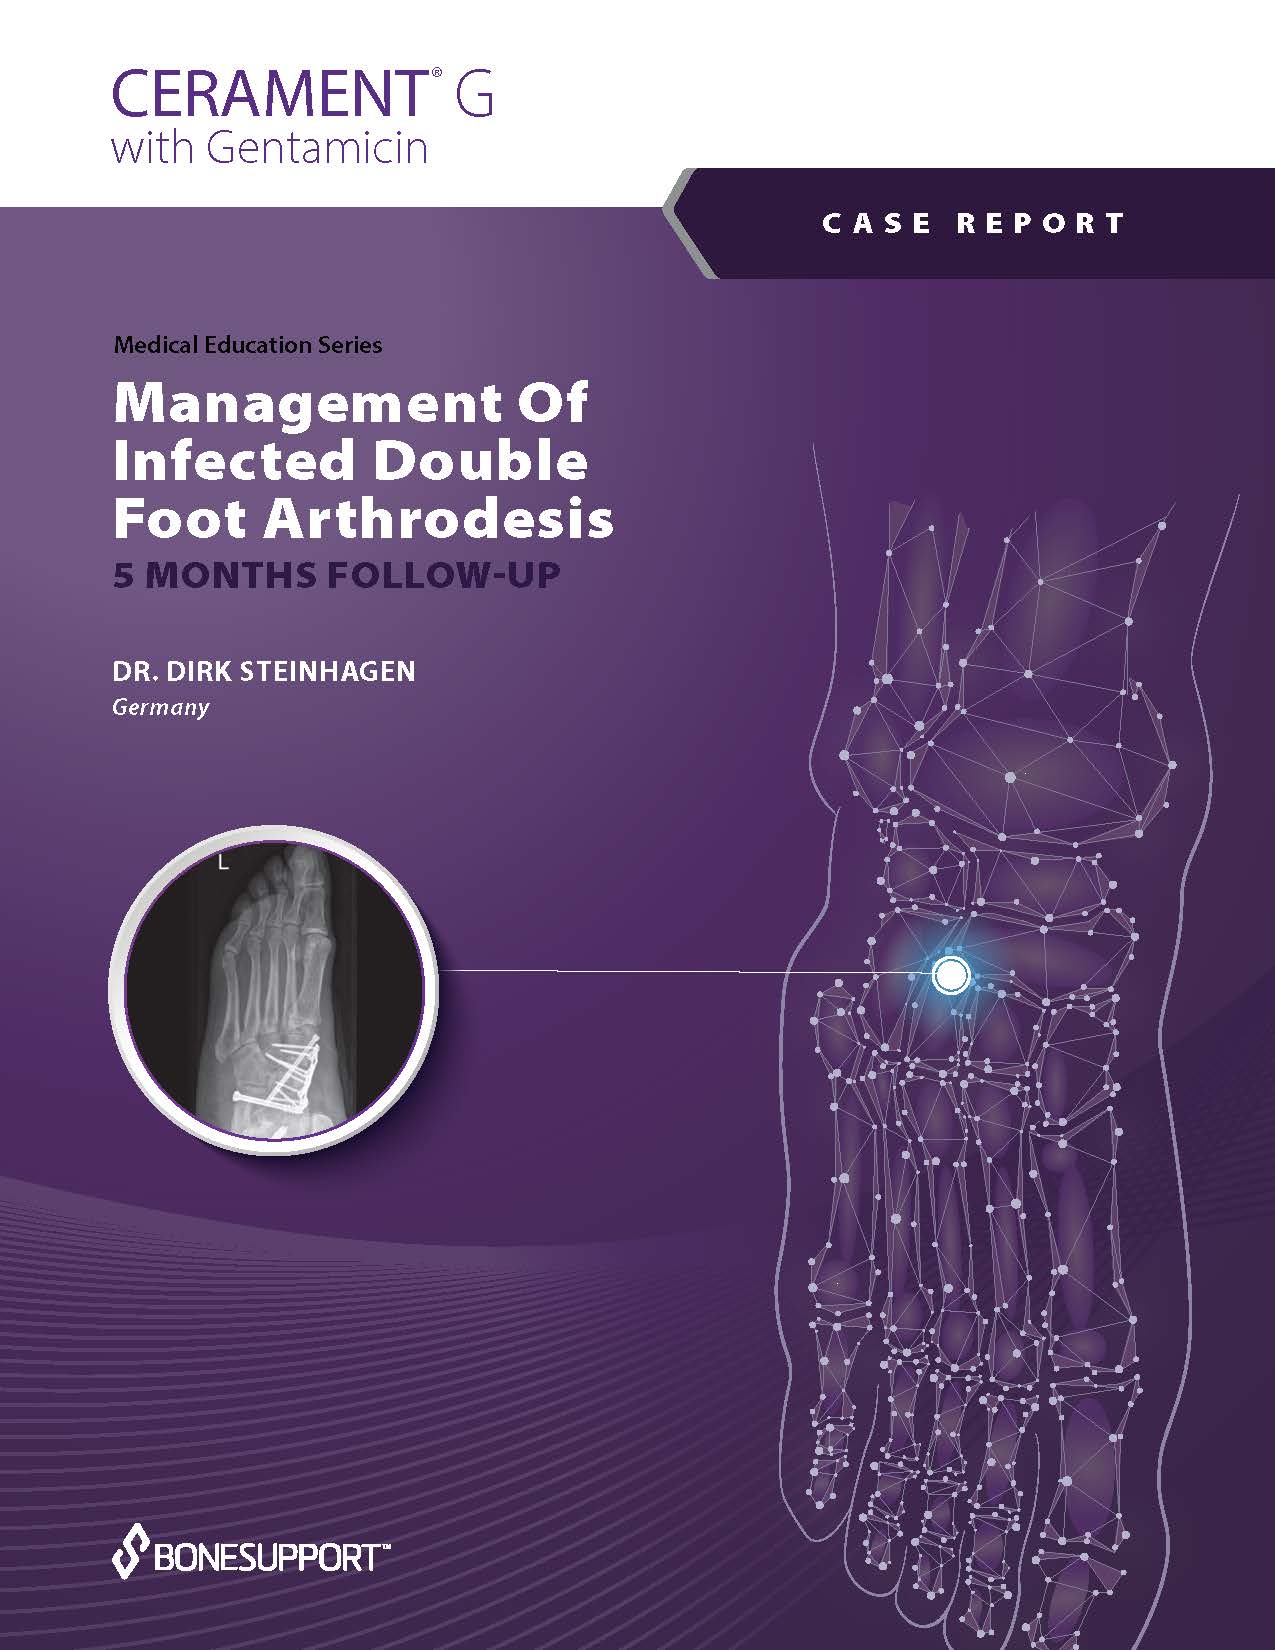 Management of infected double foot arthrodesis with CERAMENT G – 5 months follow up